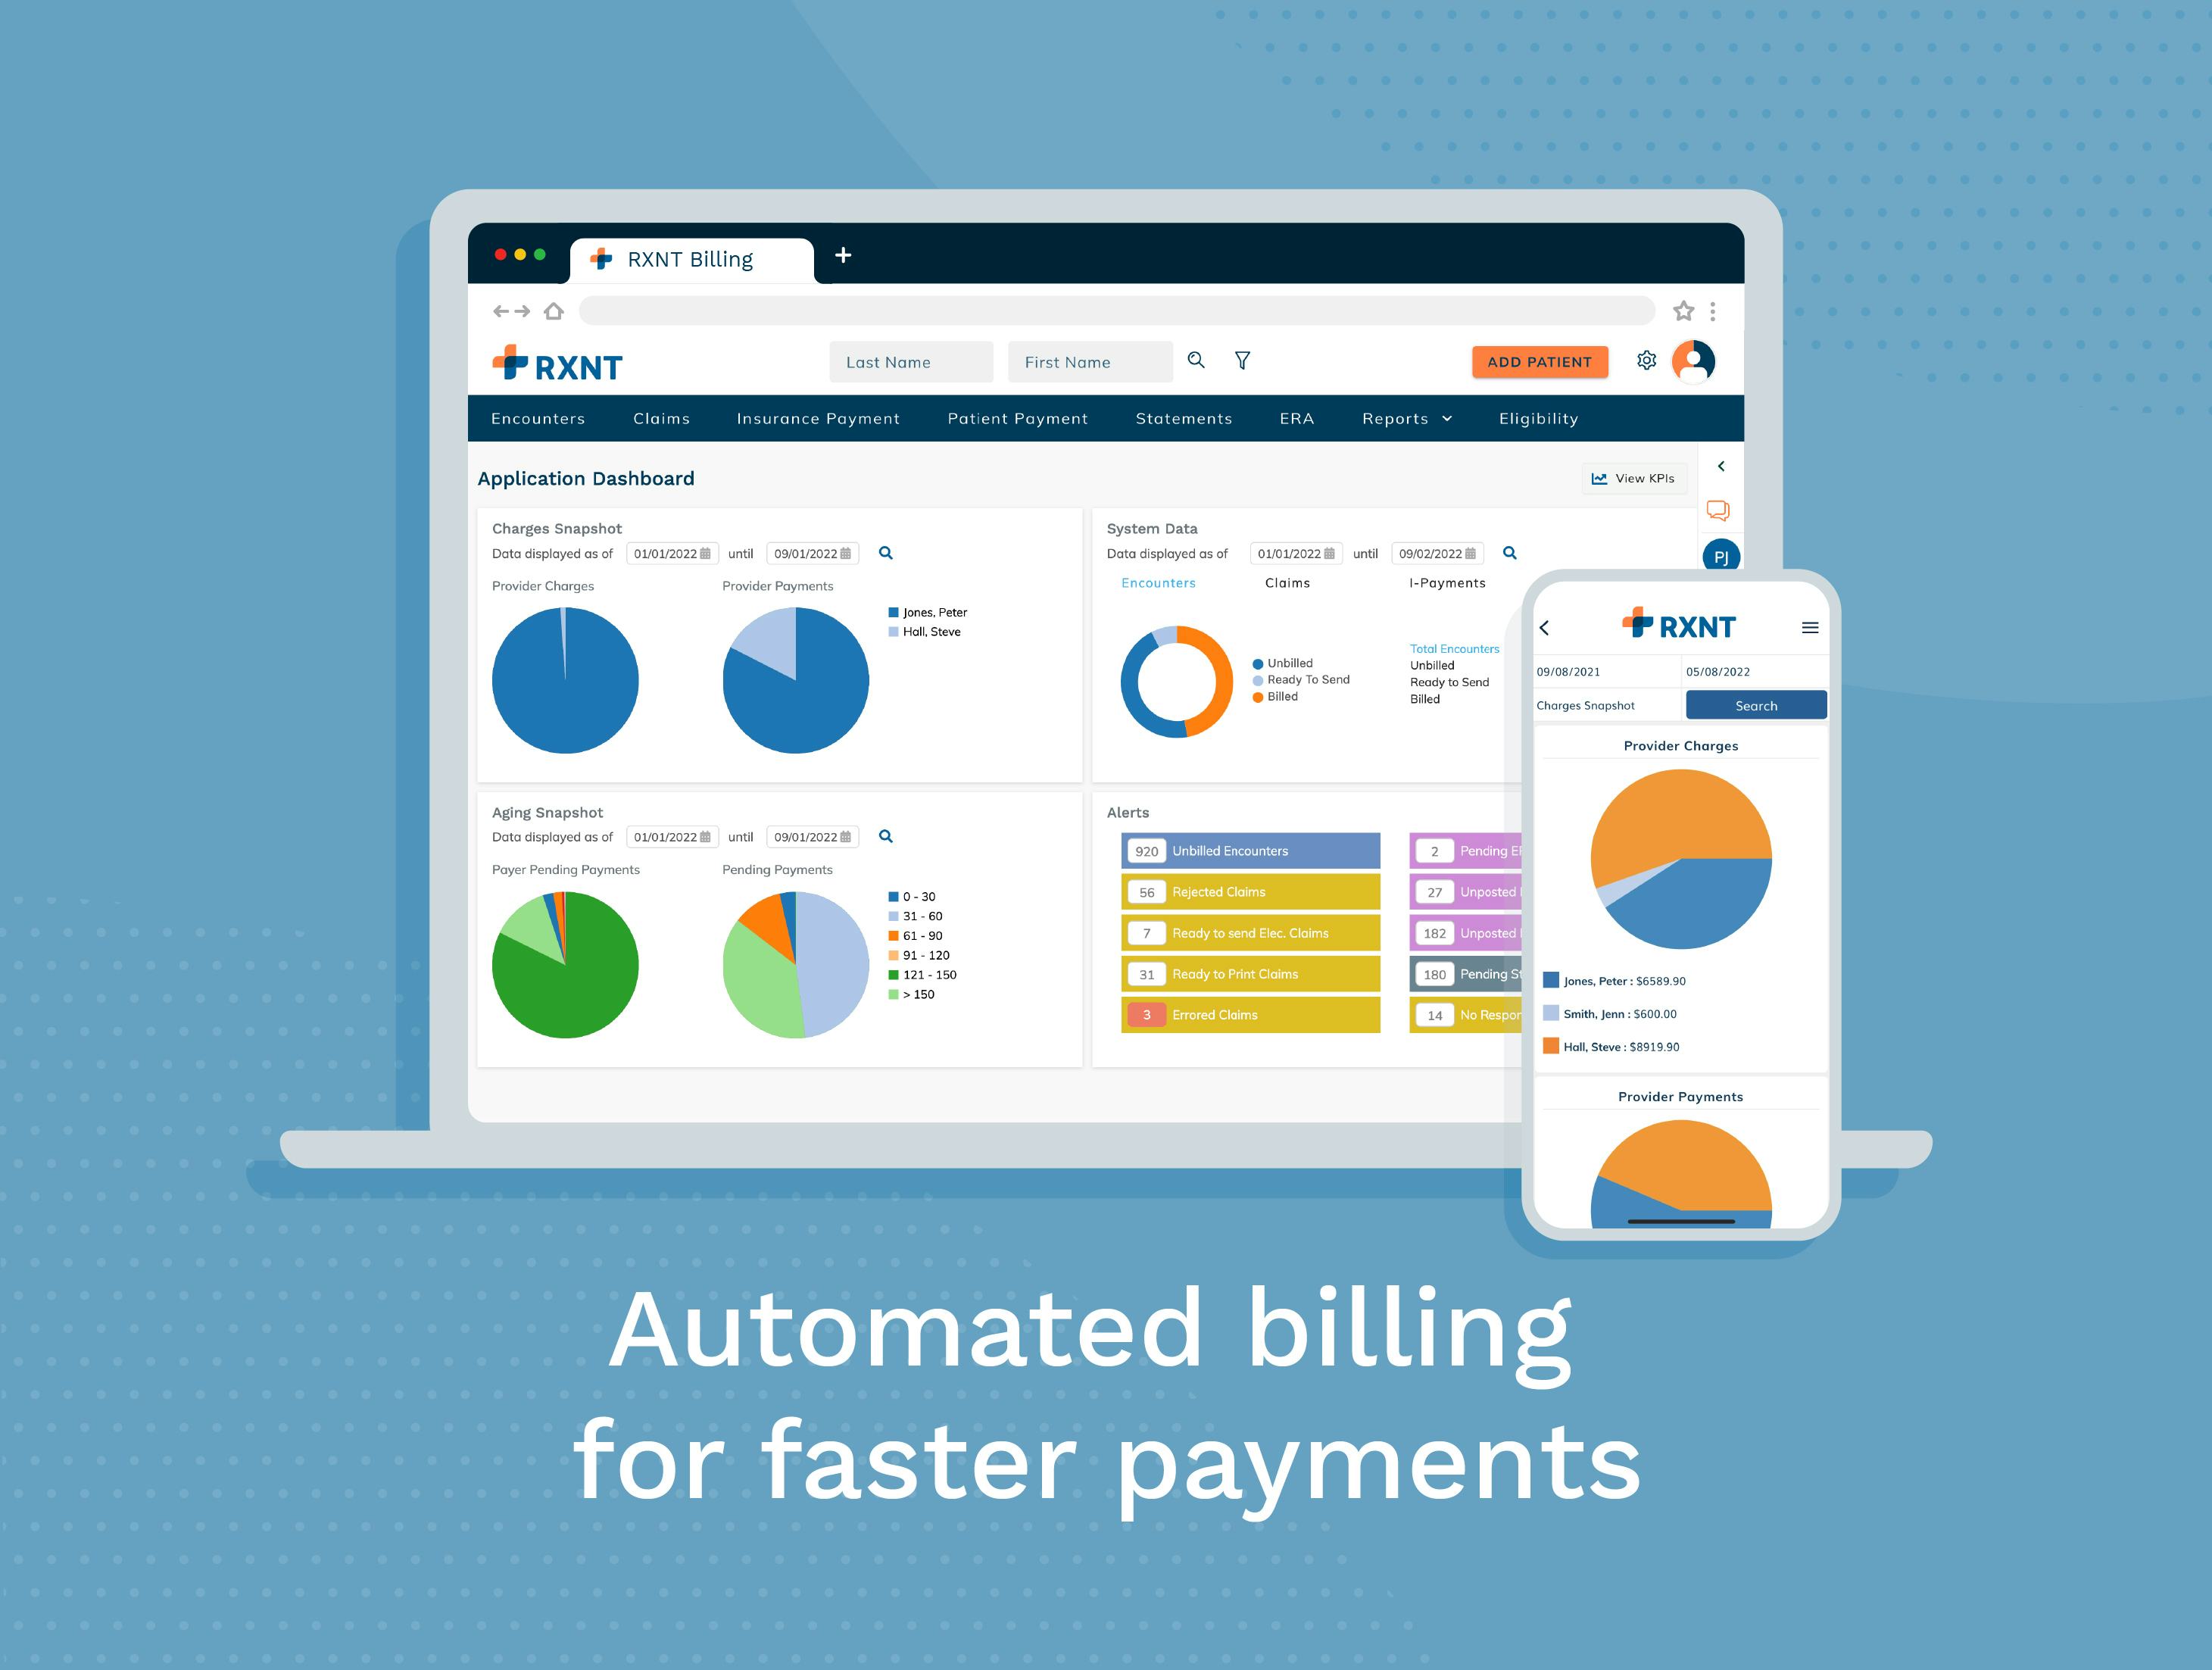 RXNT Software - RXNT Medical Billing Software. Automated billing for faster payments. Manage your business and get paid faster. Keep track of charges, claims, aging, payments, alerts, and more at-a-glance. Available for desktop, tablet, & mobile (iOS & Android).